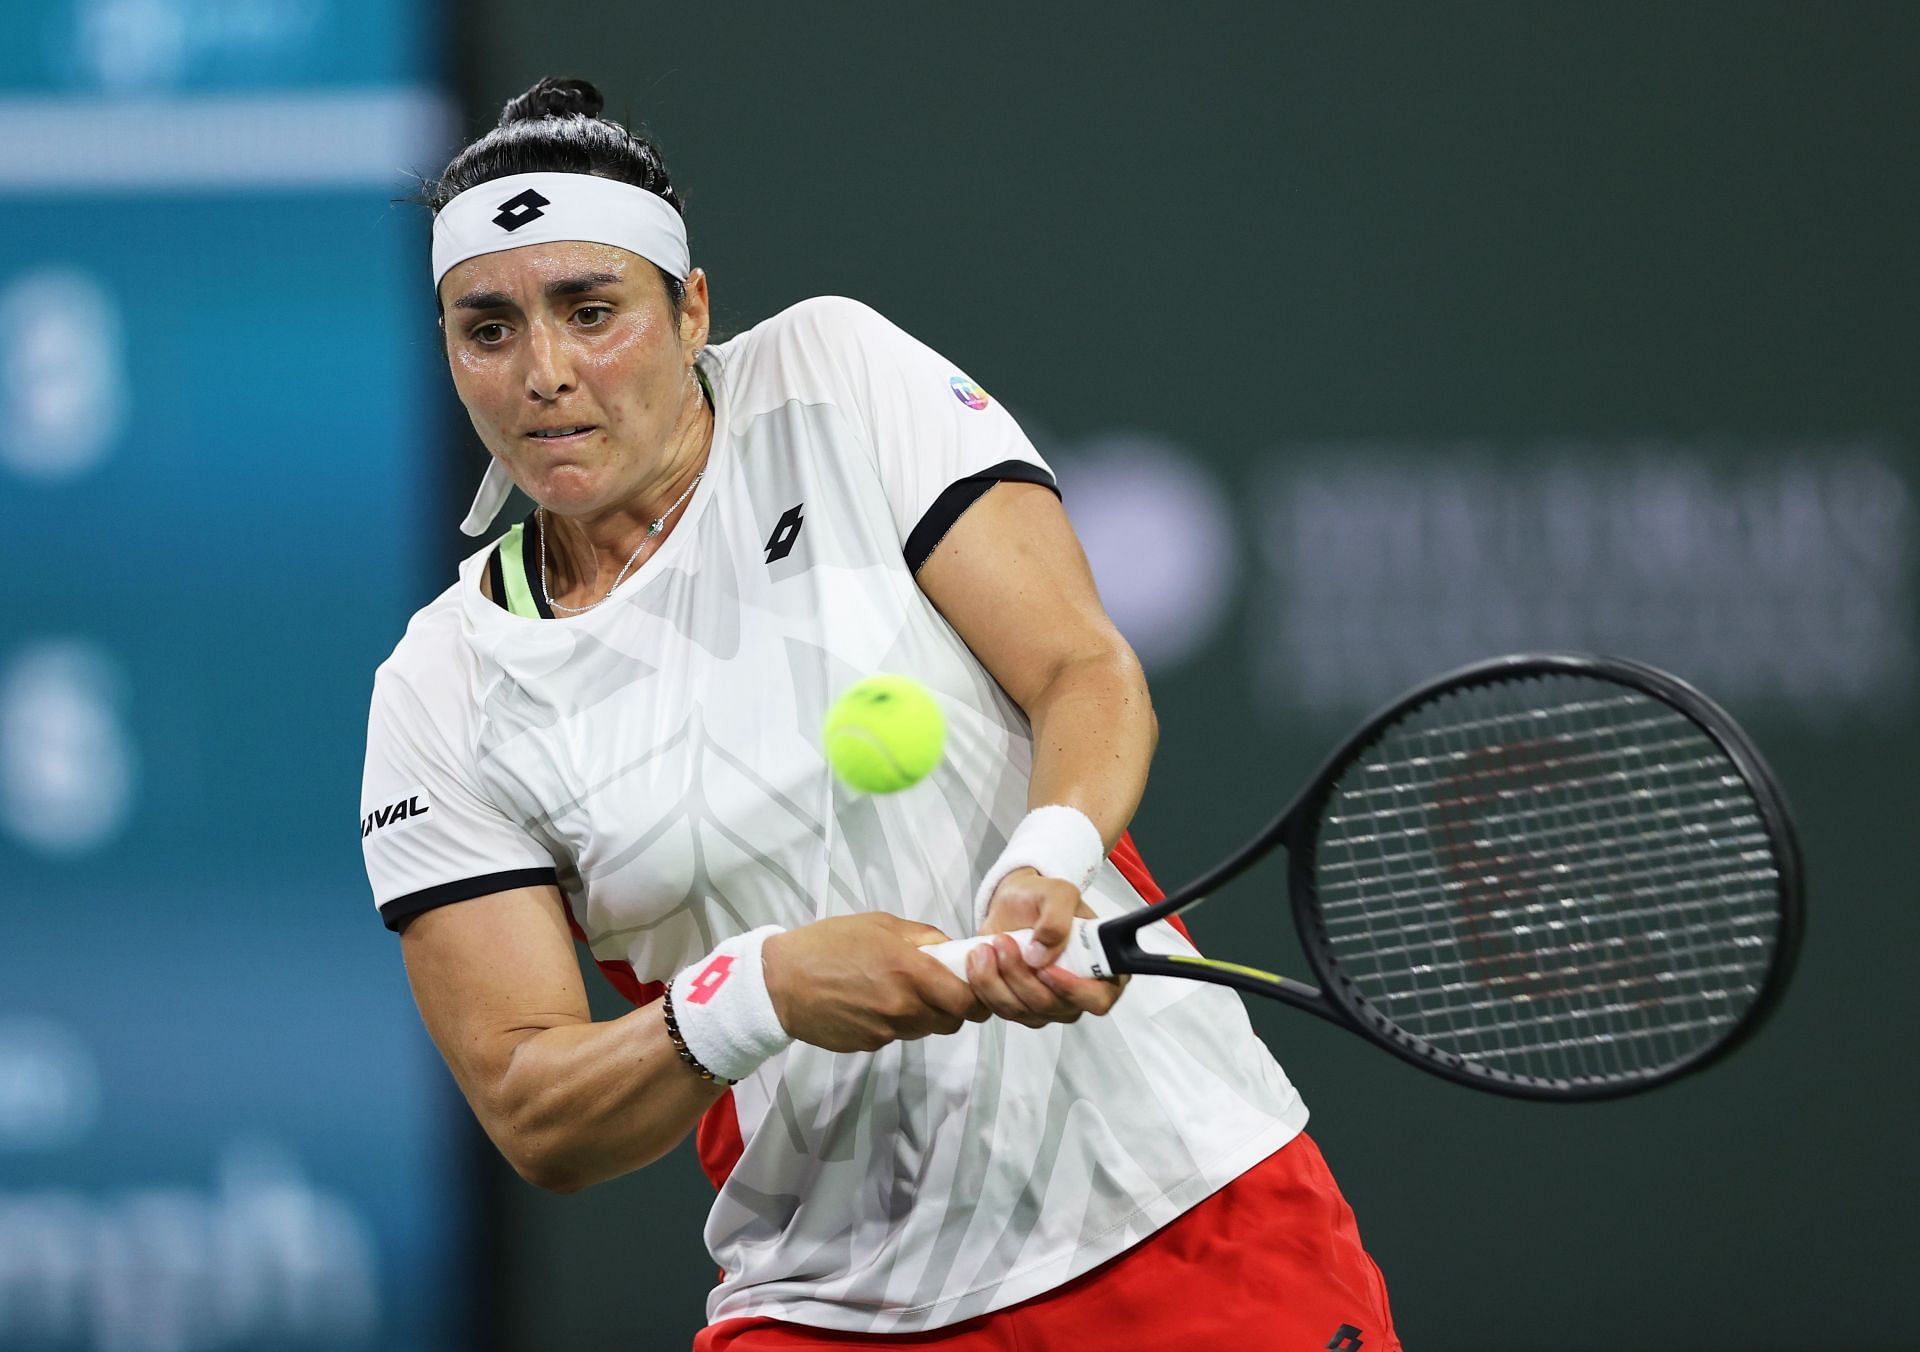 Ons Jabeur in action at the BNP Paribas Open